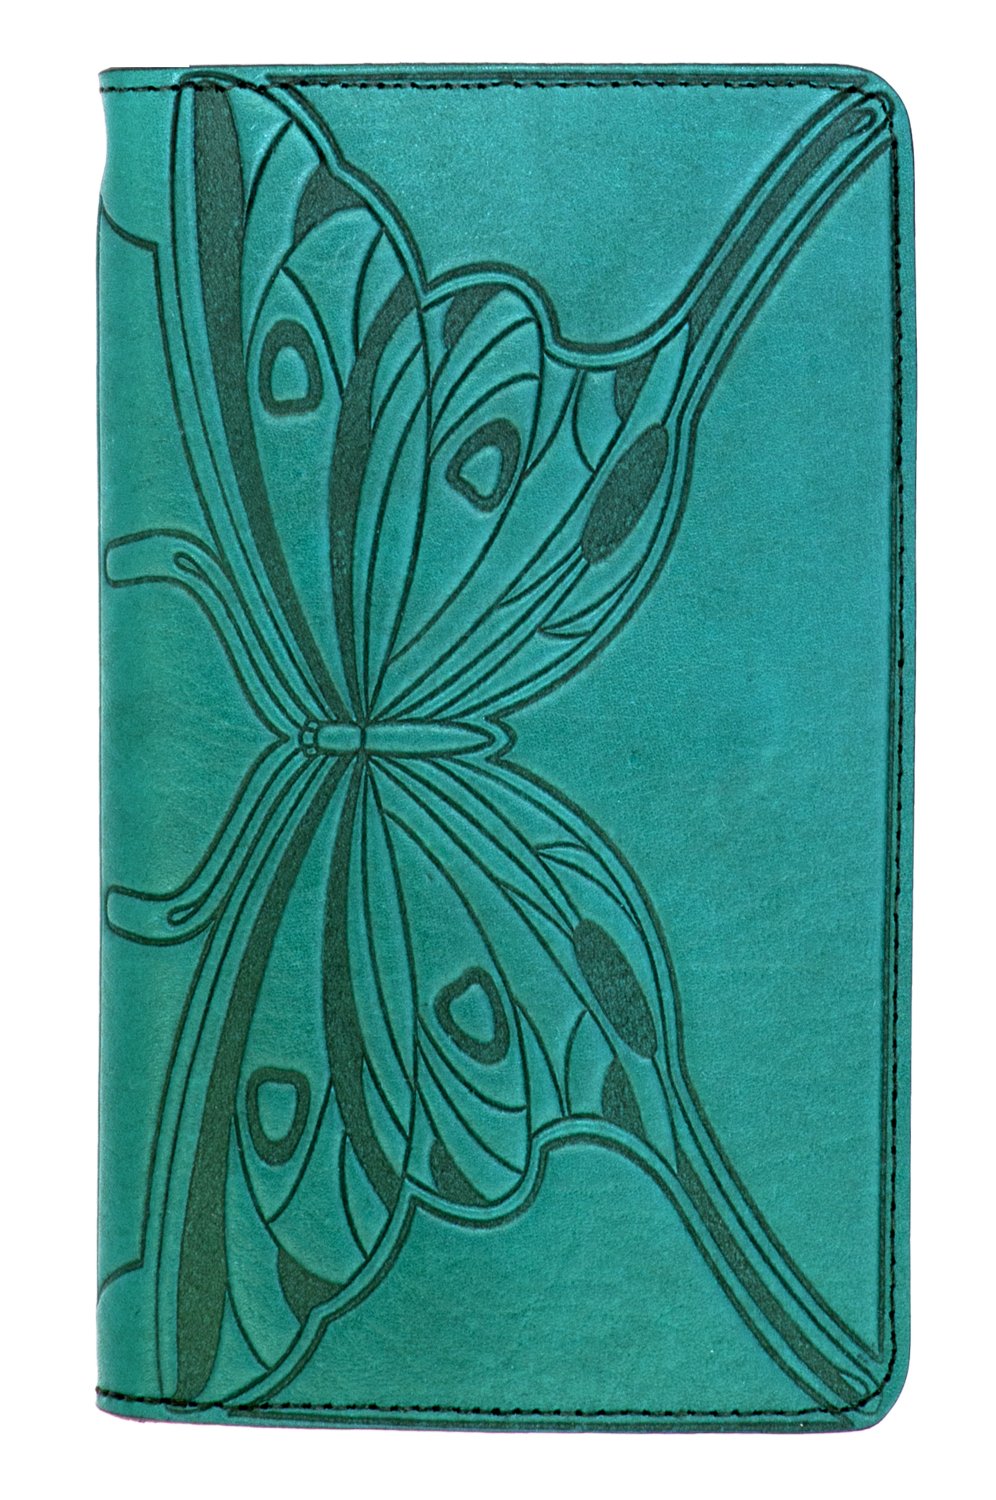 Large Leather Smartphone Wallet - Butterfly